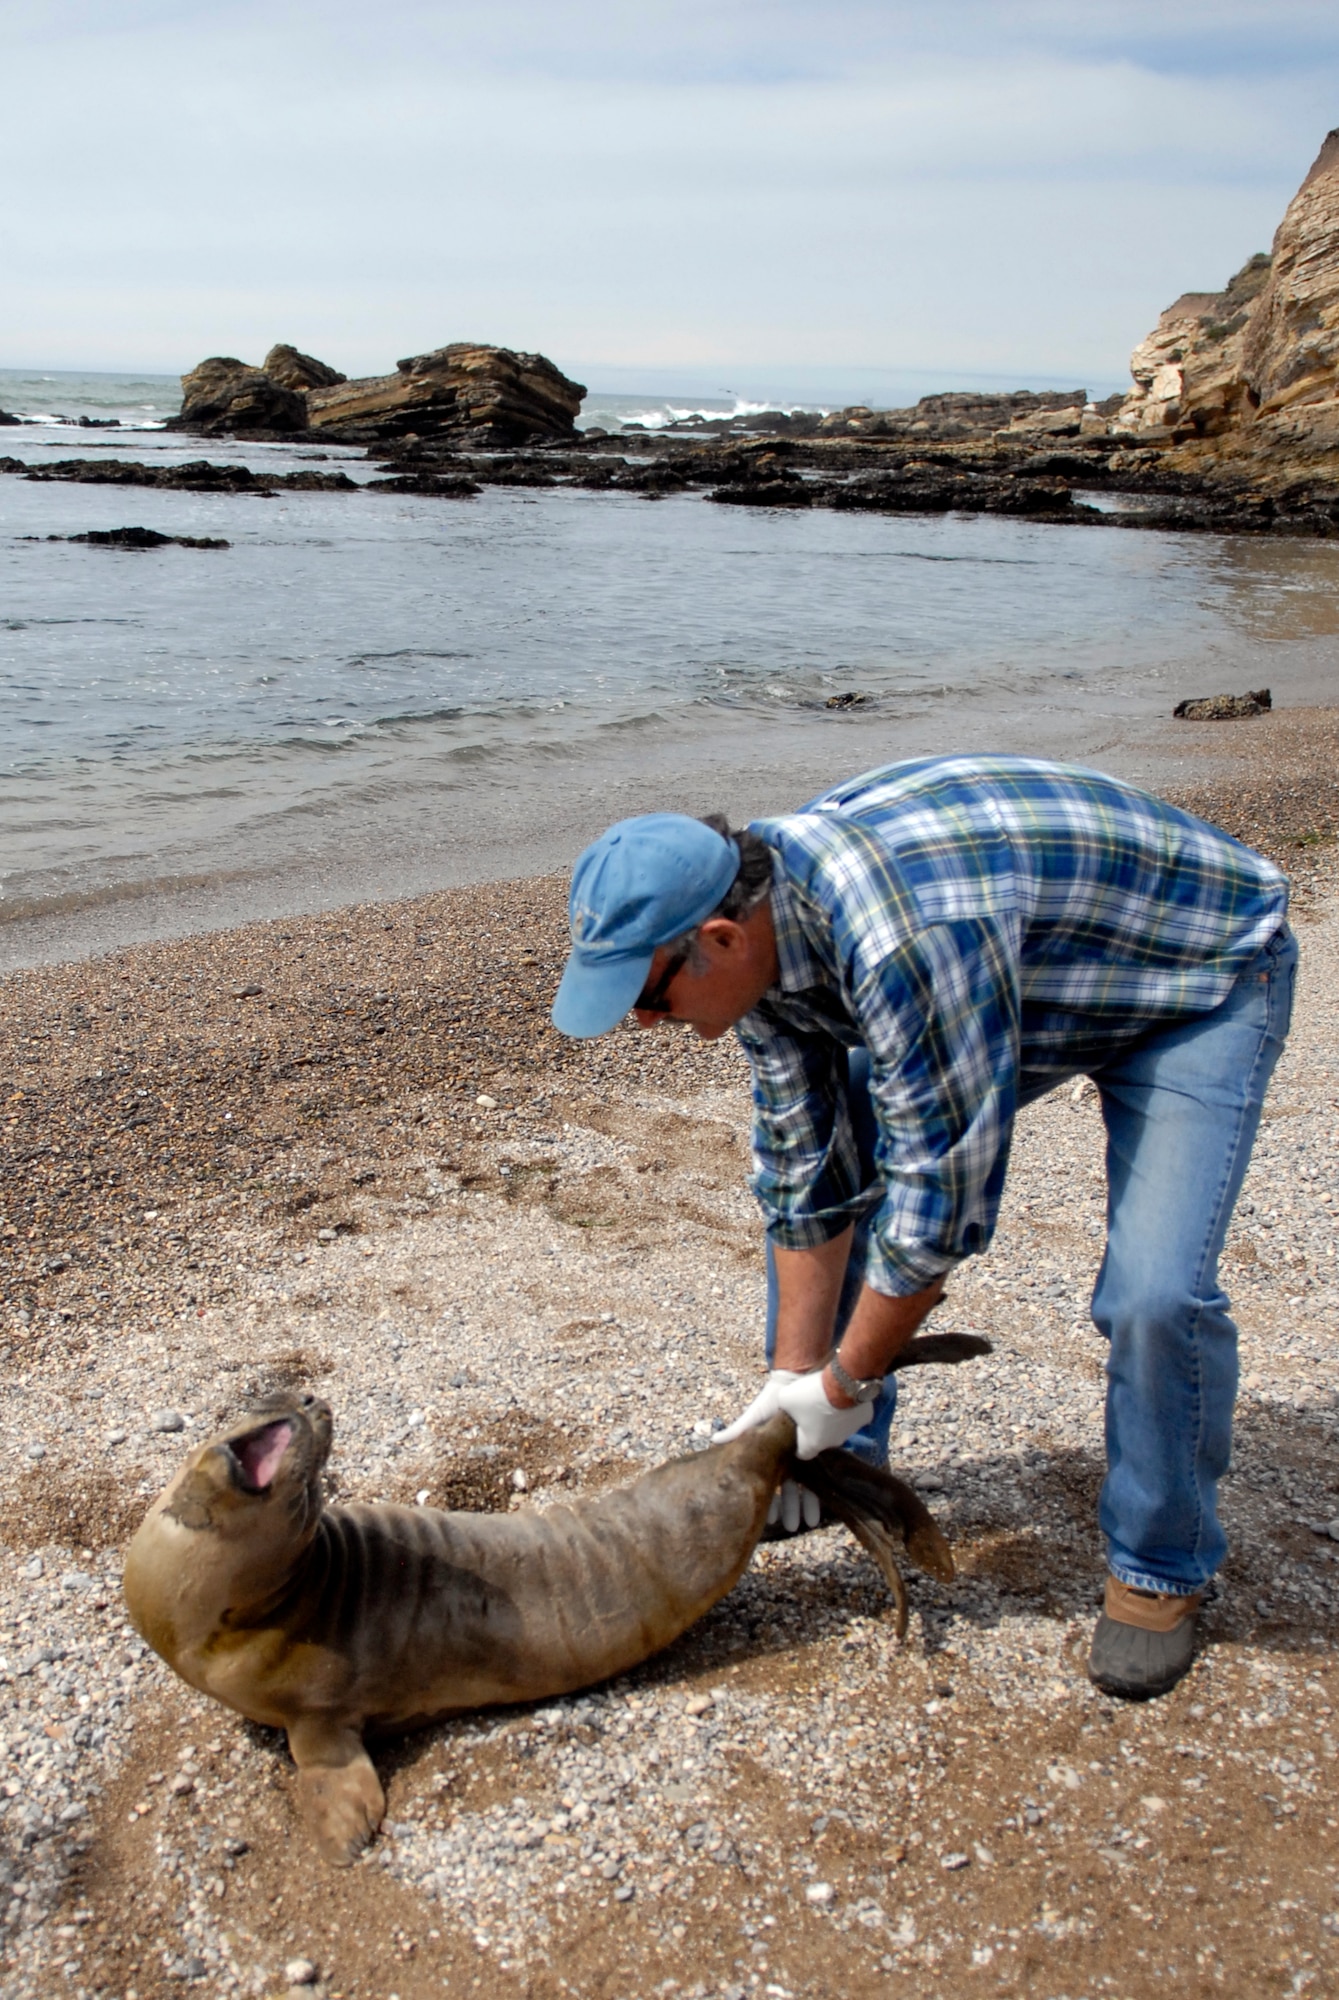 VANDENBERG AIR FORCE BASE, Calif. -- Peter Howorth, Santa Barbara Marine Mammal Center director, pull a baby Northern California Elephant Seal toward the ocean at a remote beach here Tuesday, April 24, 2012. The Santa Barbara Marine Mammal Center provides rescue, rehabilitation and release of trapped and endangered marine mammals along California’s Central Coast.  (U.S. Air Force photo/Jennifer Green-Lanchoney)